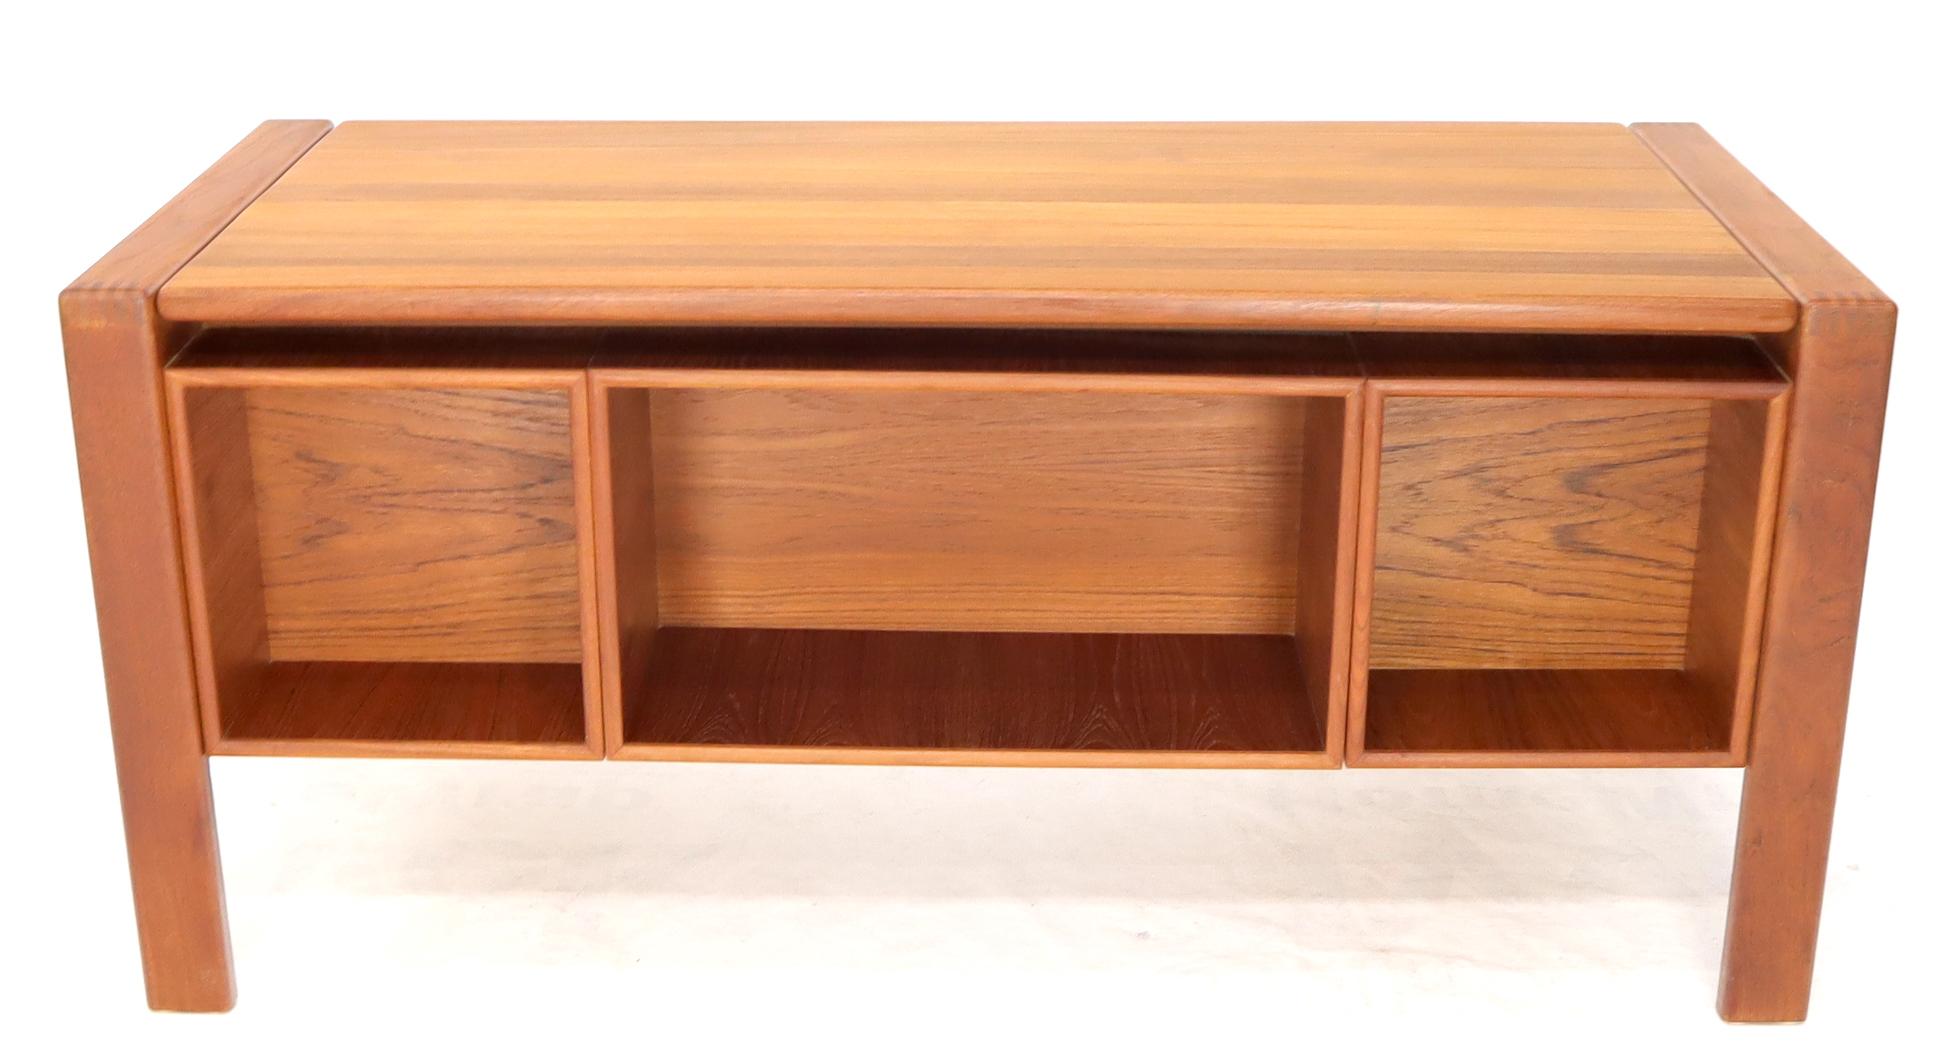 Executive Solid Teak Midcentury Danish Modern Desk with Bookcase and File Drawer 9